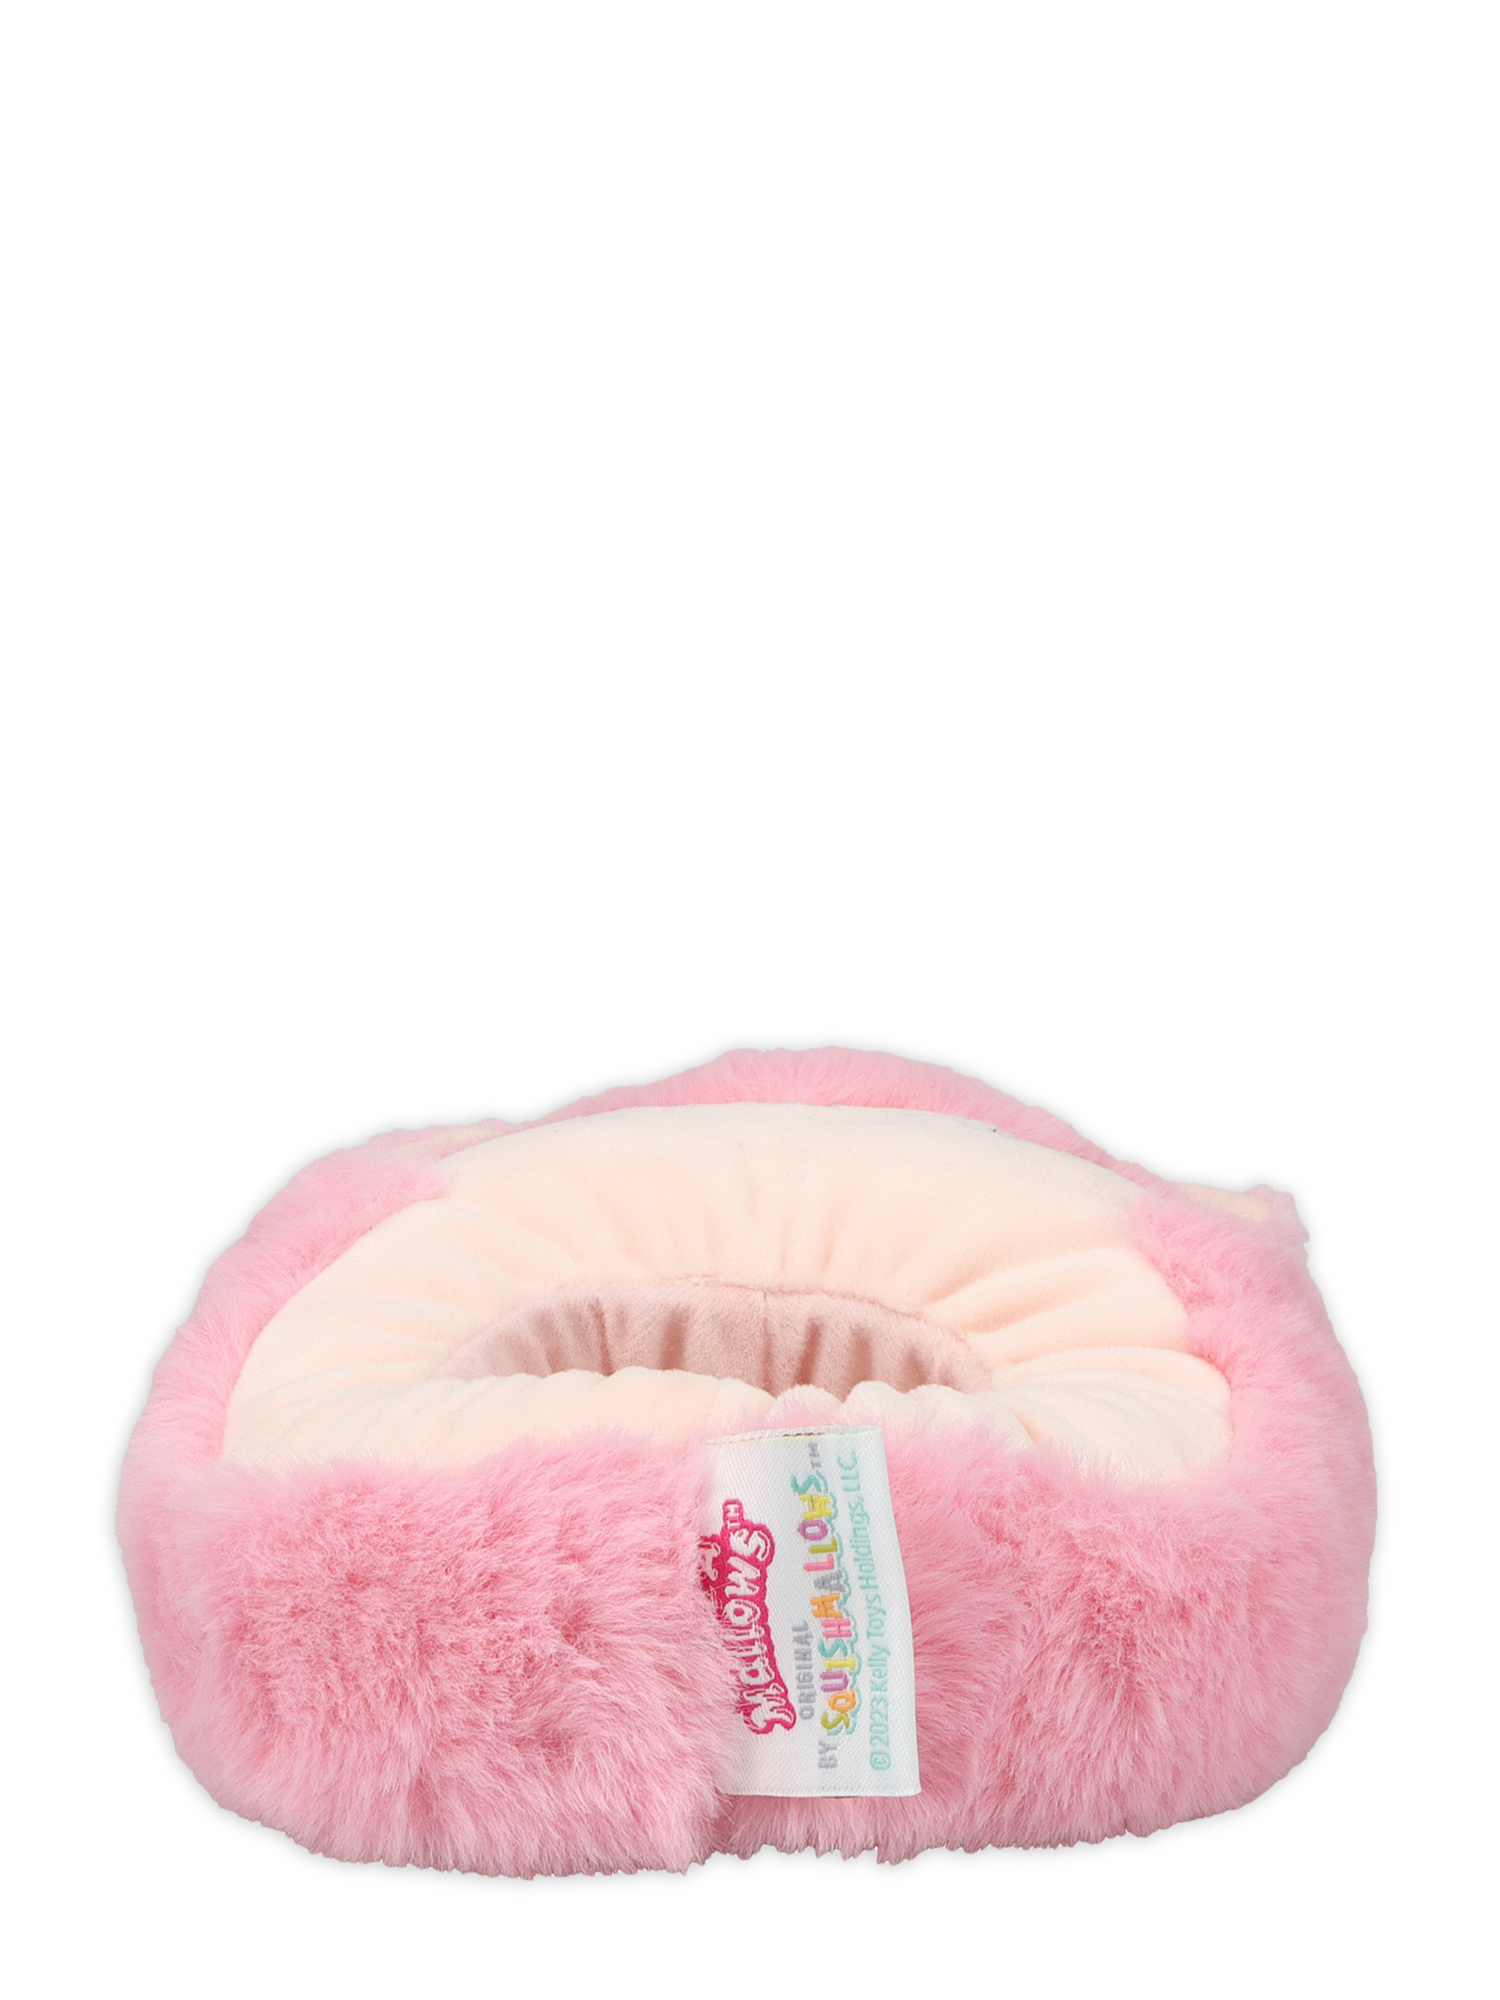 Squishmallows Toddler & Kids Anu the Hamster Slipper - image 4 of 6